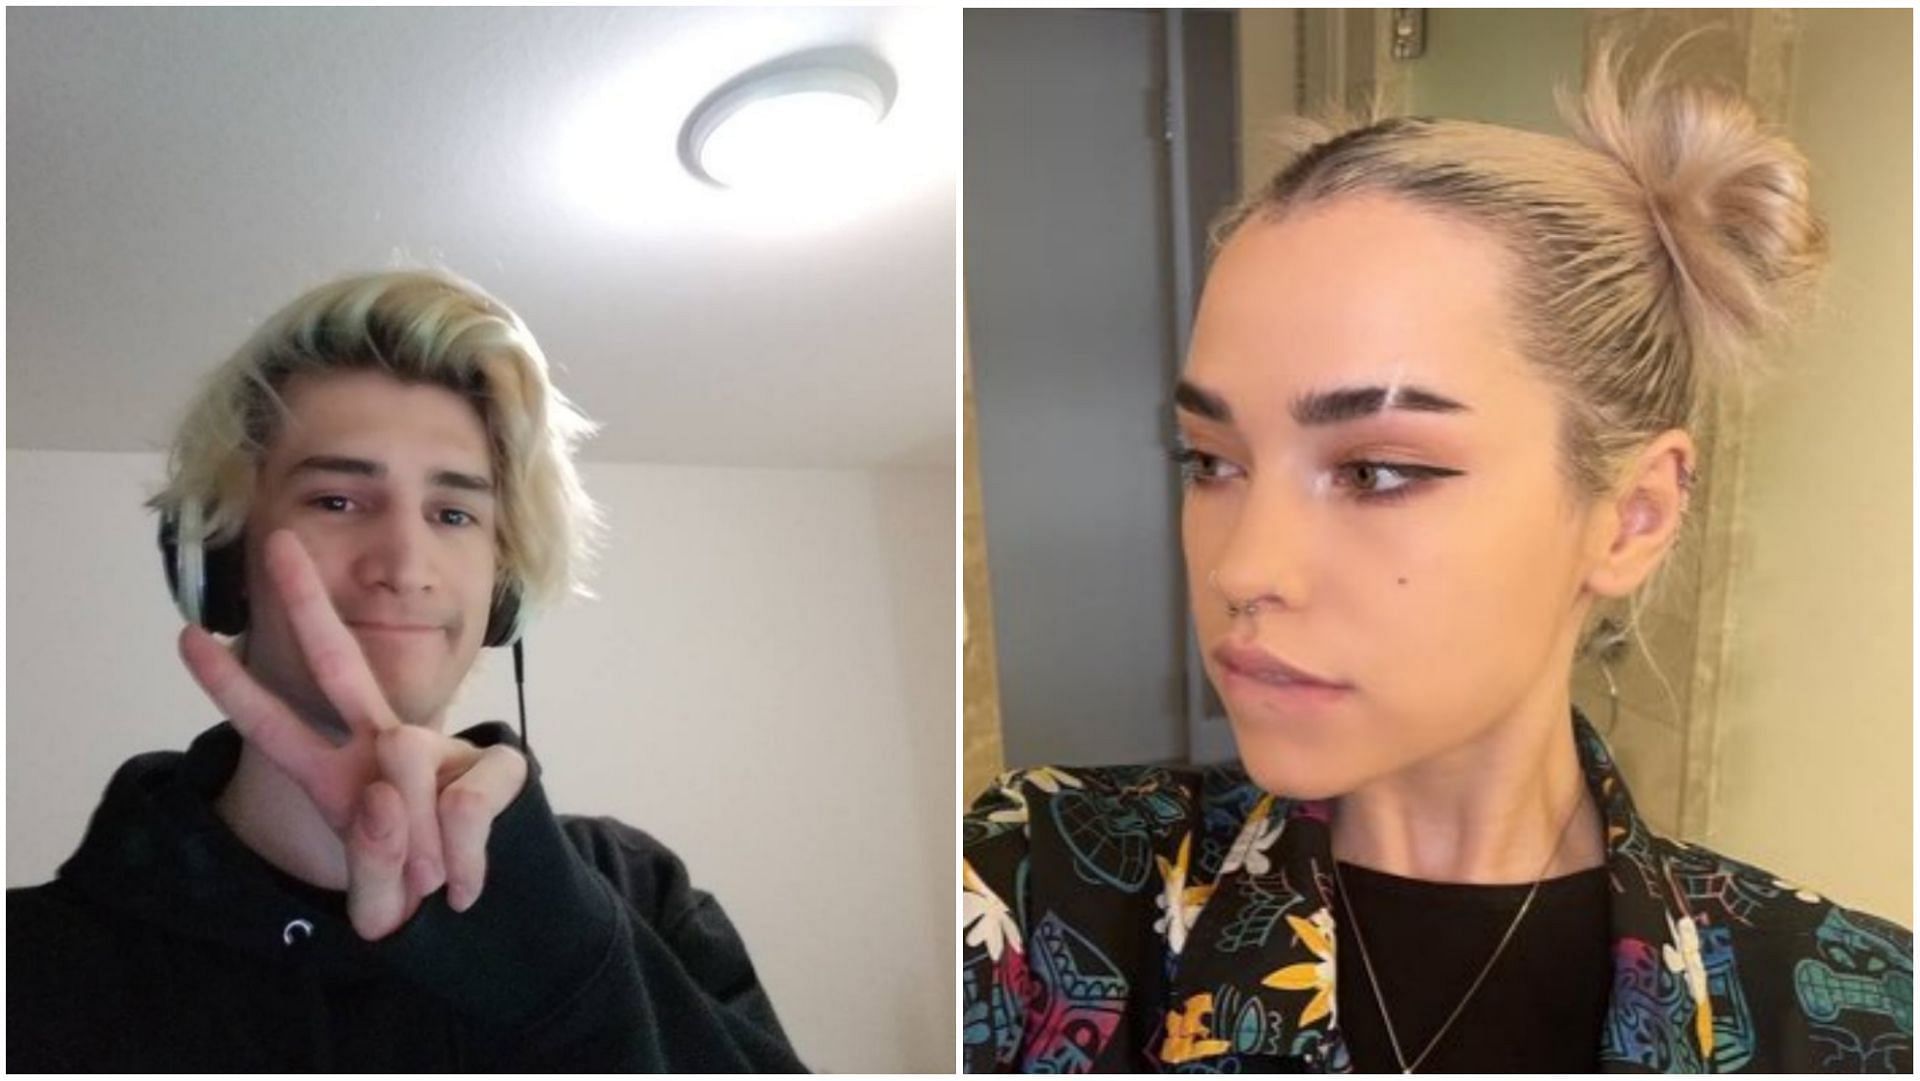 xQc had fellow Twitch streamer nyyxxii over at his house, kissing her on his latest stream. (Images via Twitter)